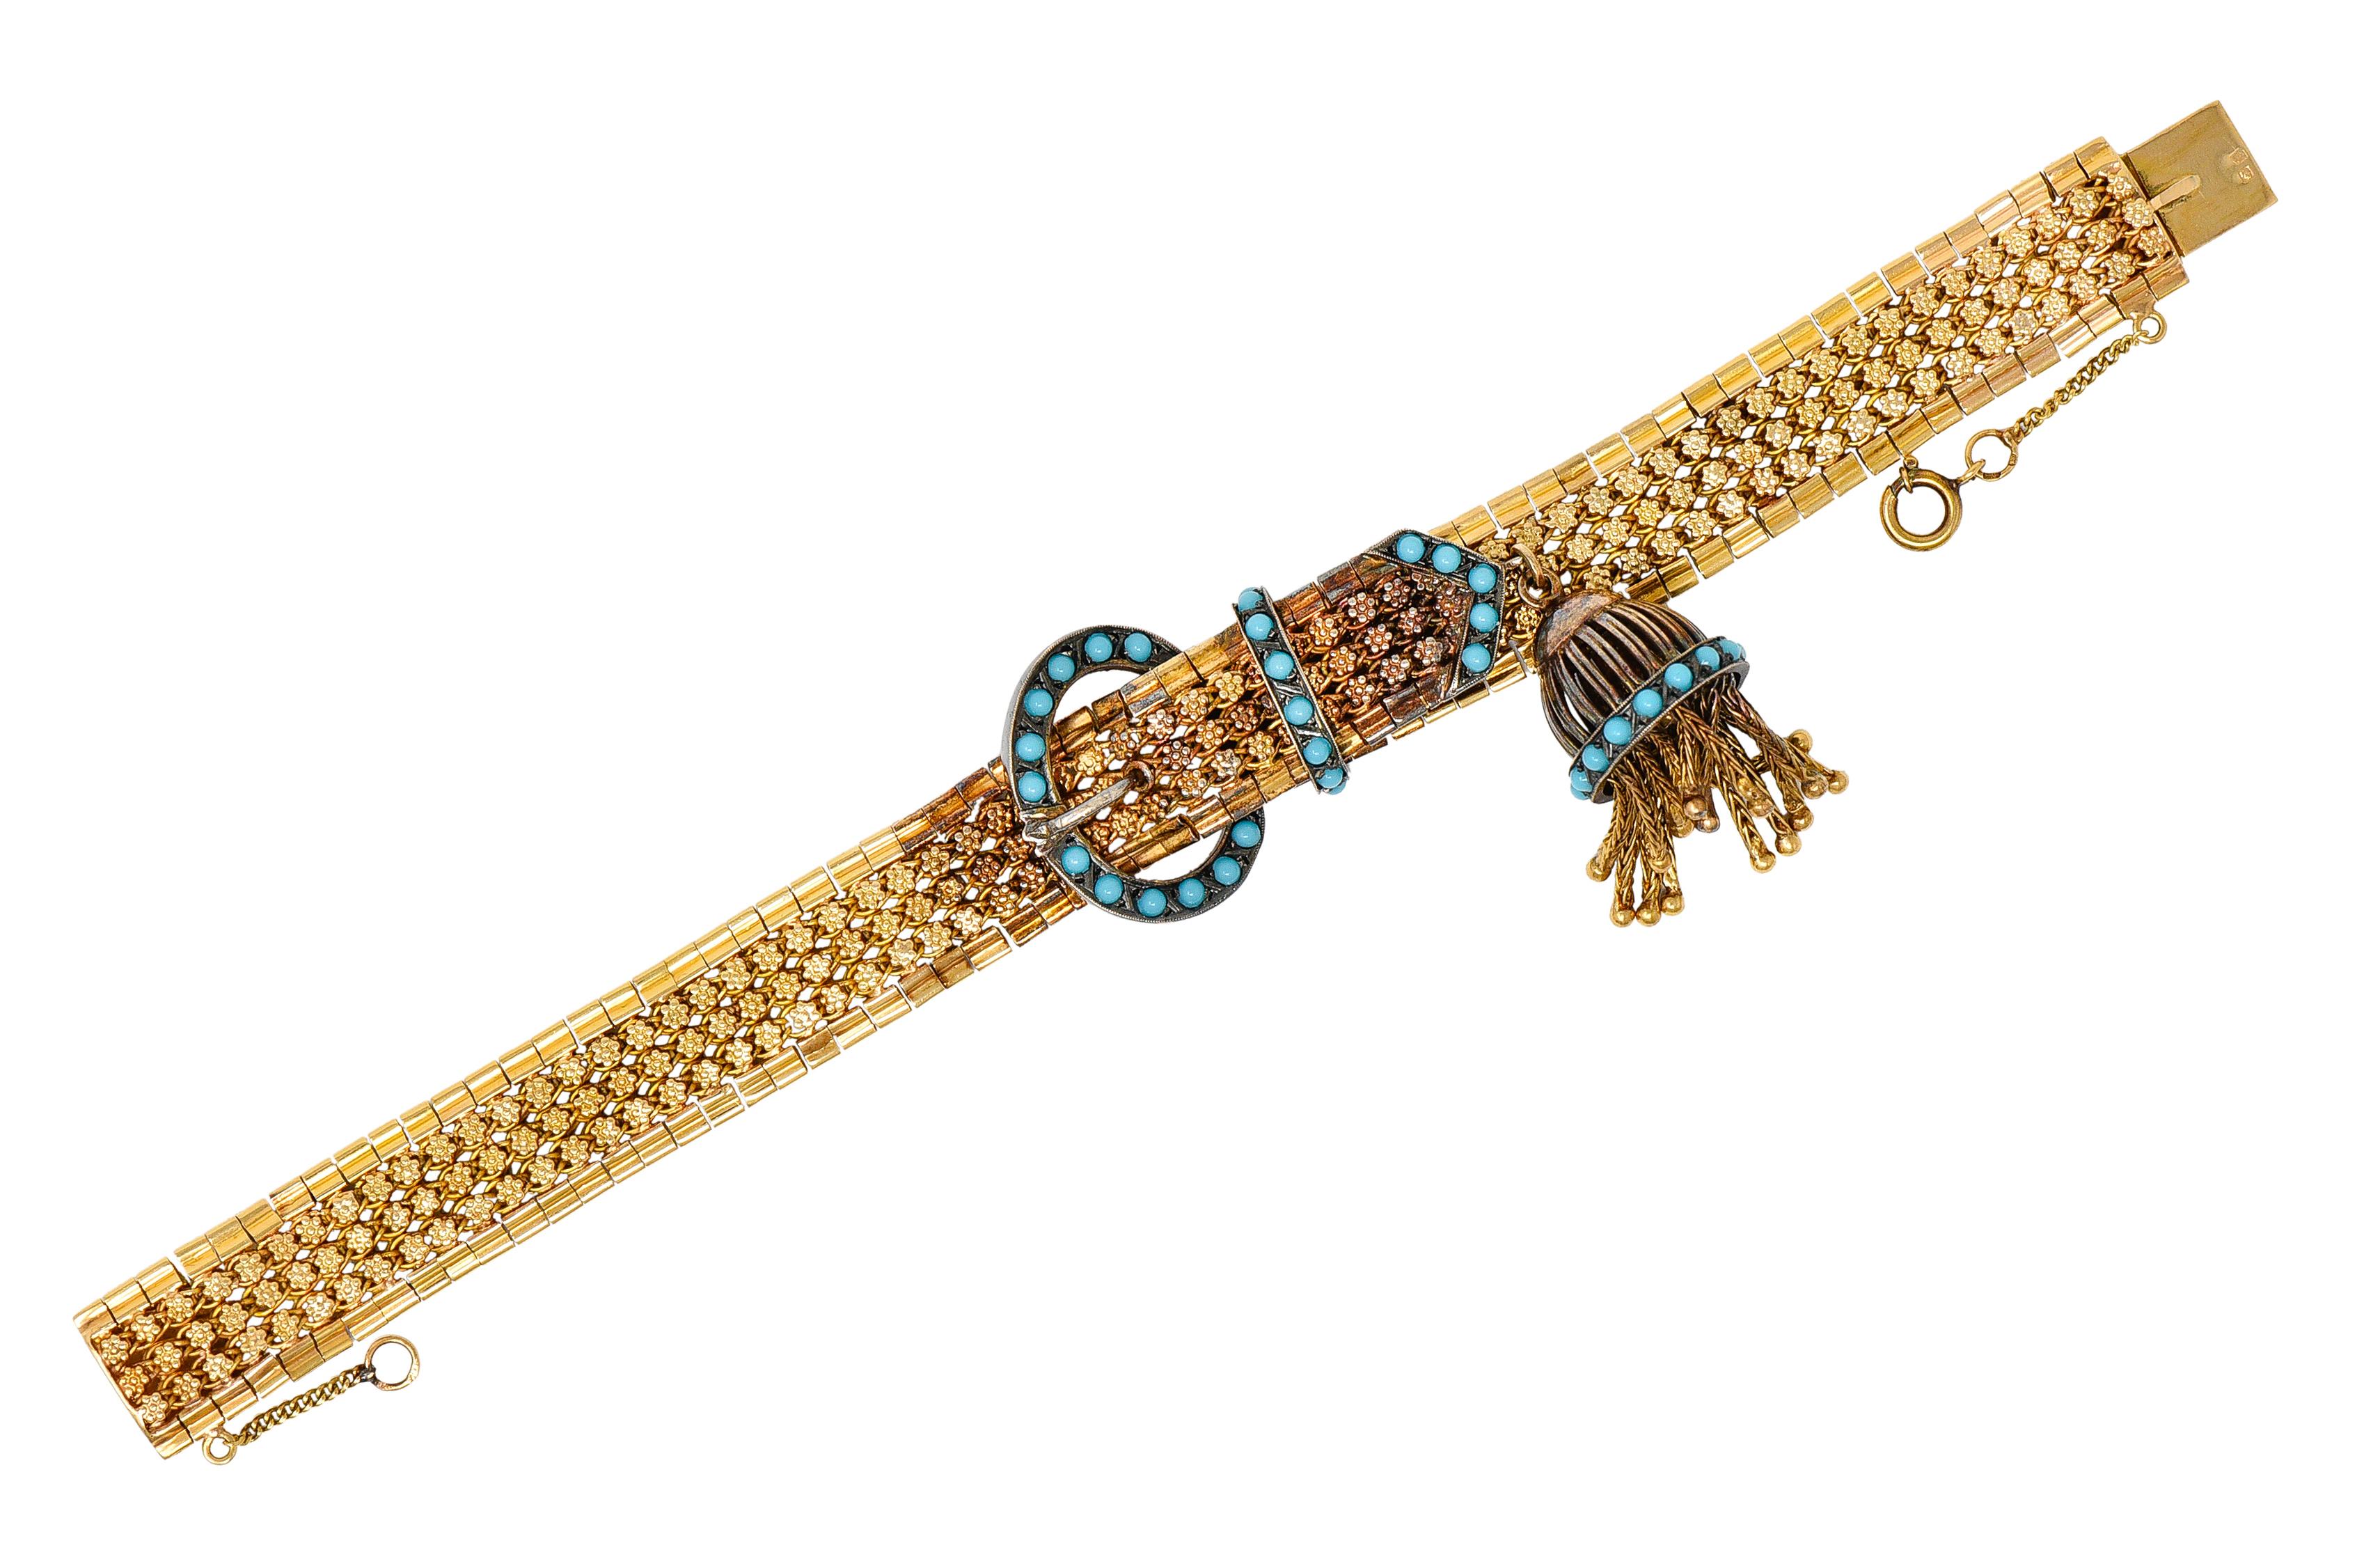 Woven gold bracelet features an oxidized gold buckle motif

With stylized blossom stations and polished gold edges

Centering an articulated and substantial bell shaped tassel charm

Accented by 2.0 mm round sky blue cabochons - pastel and very well